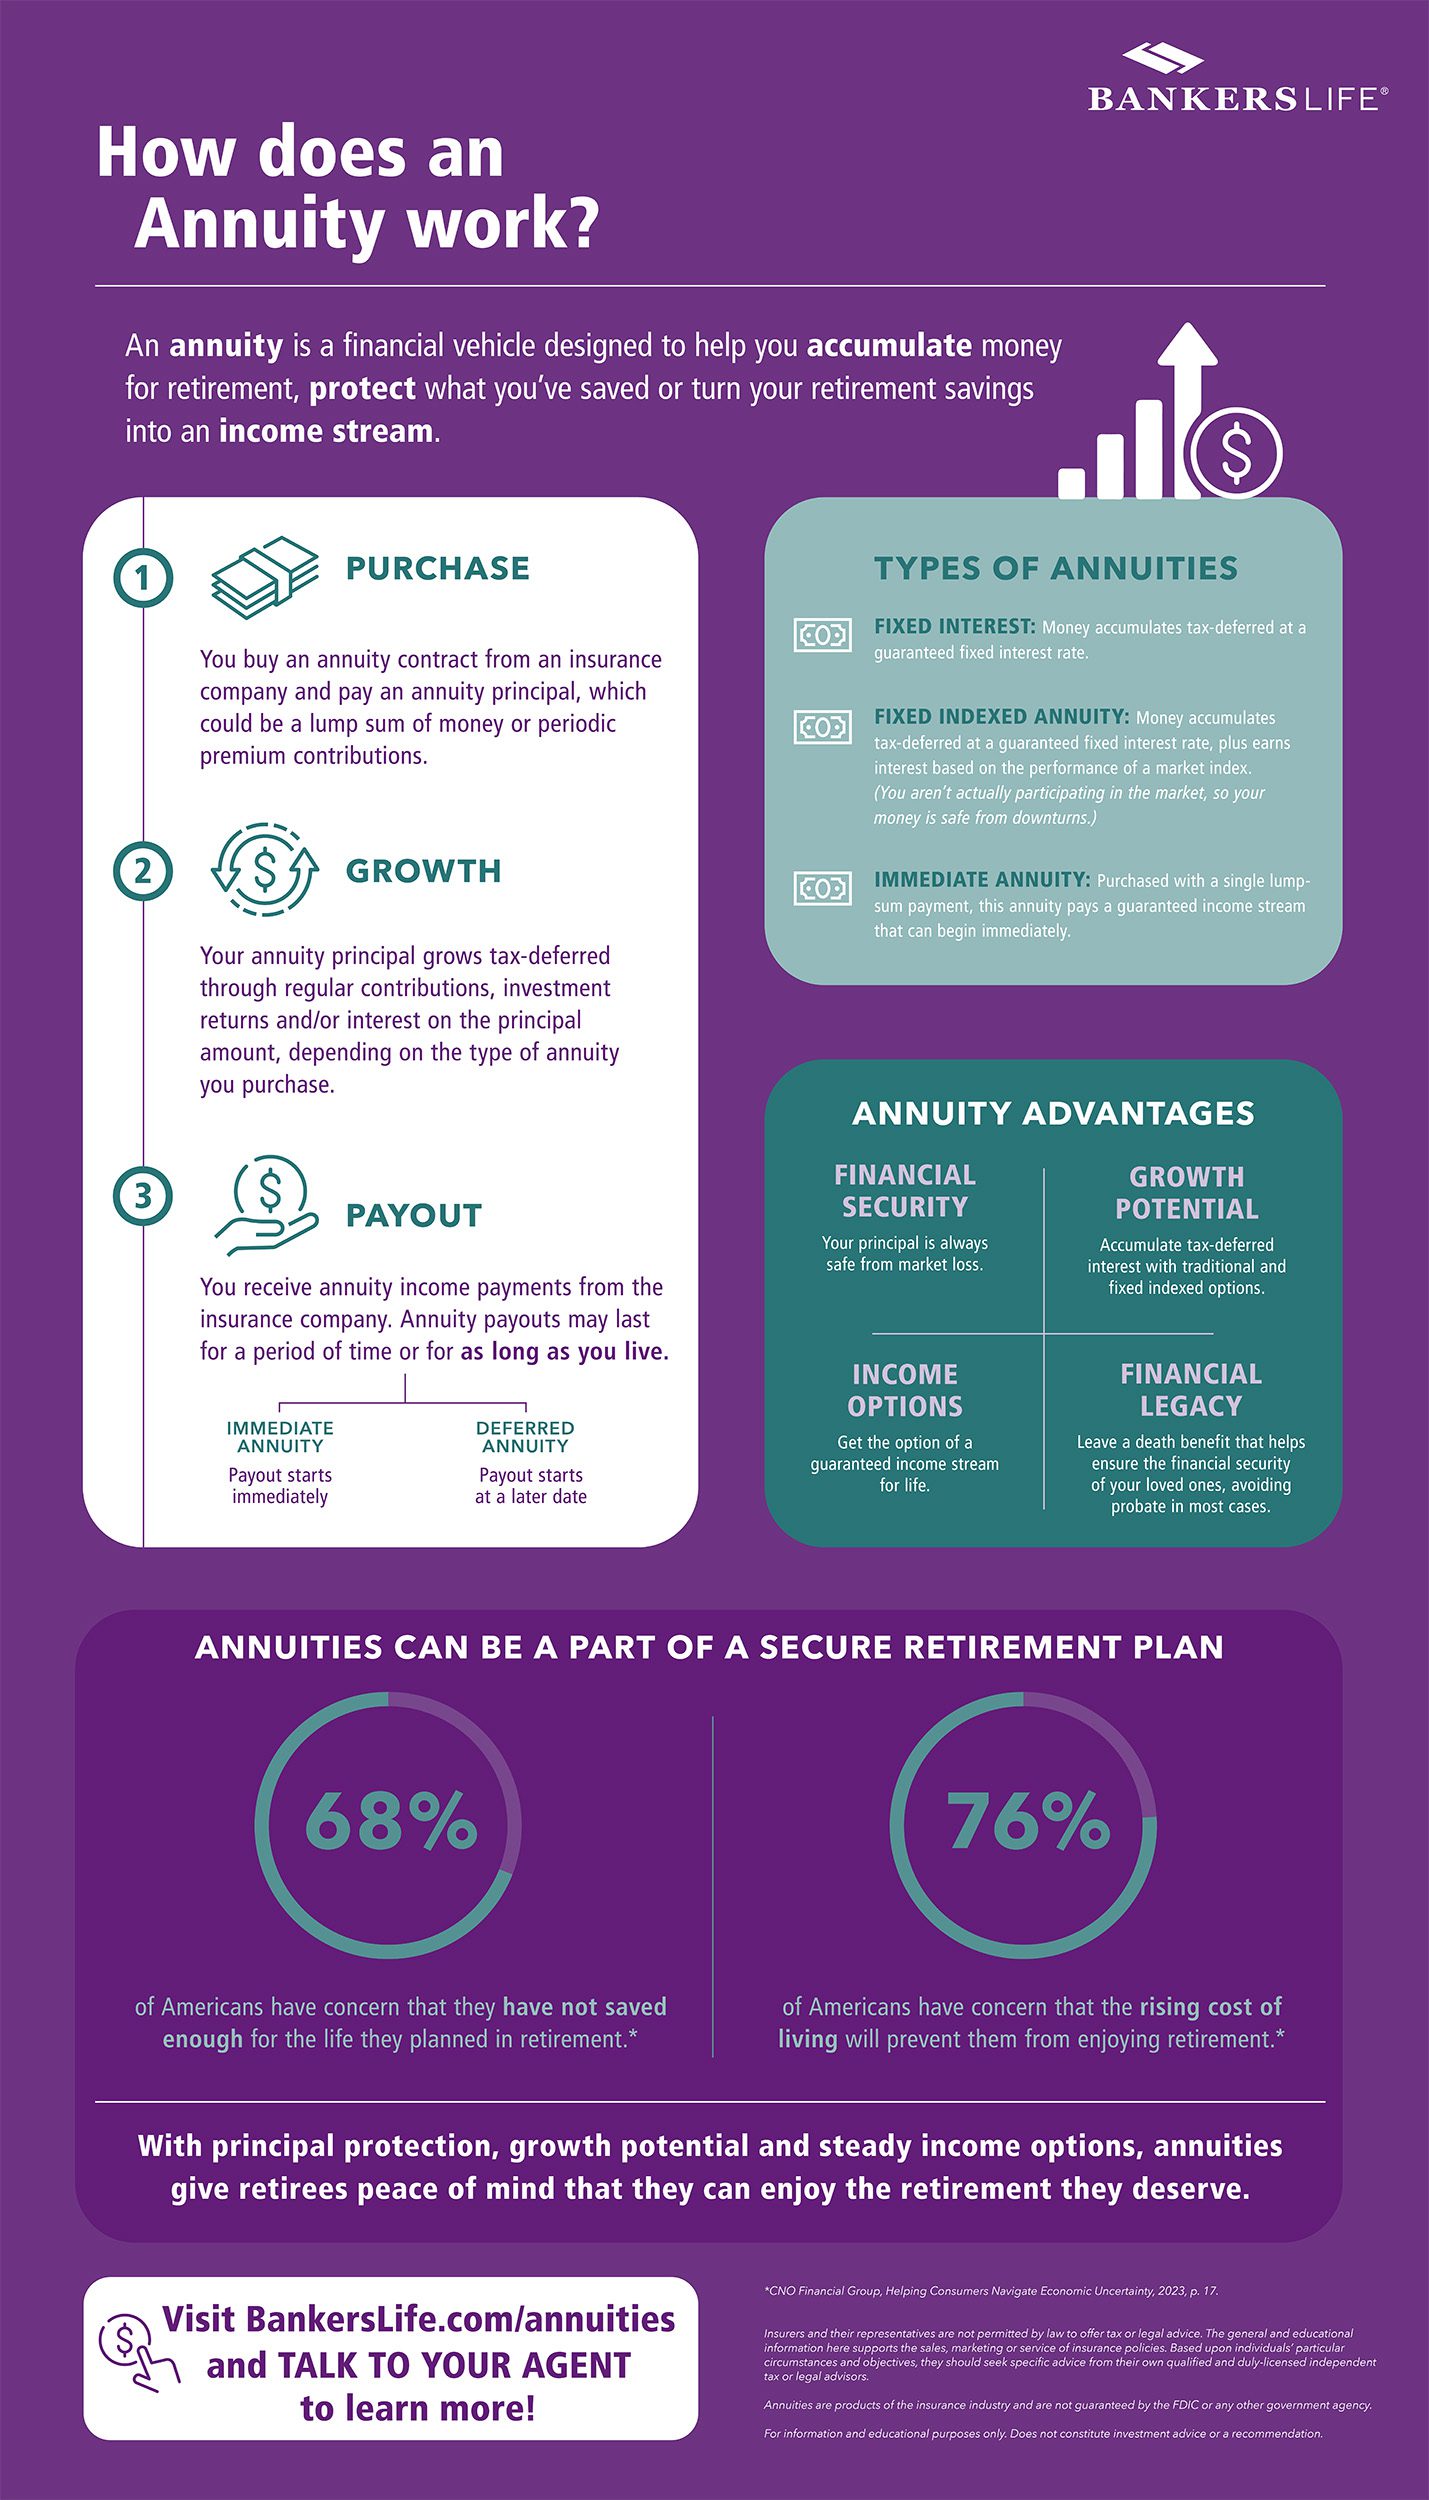 Infographic explaining how an Annuity works and the different types to choose from